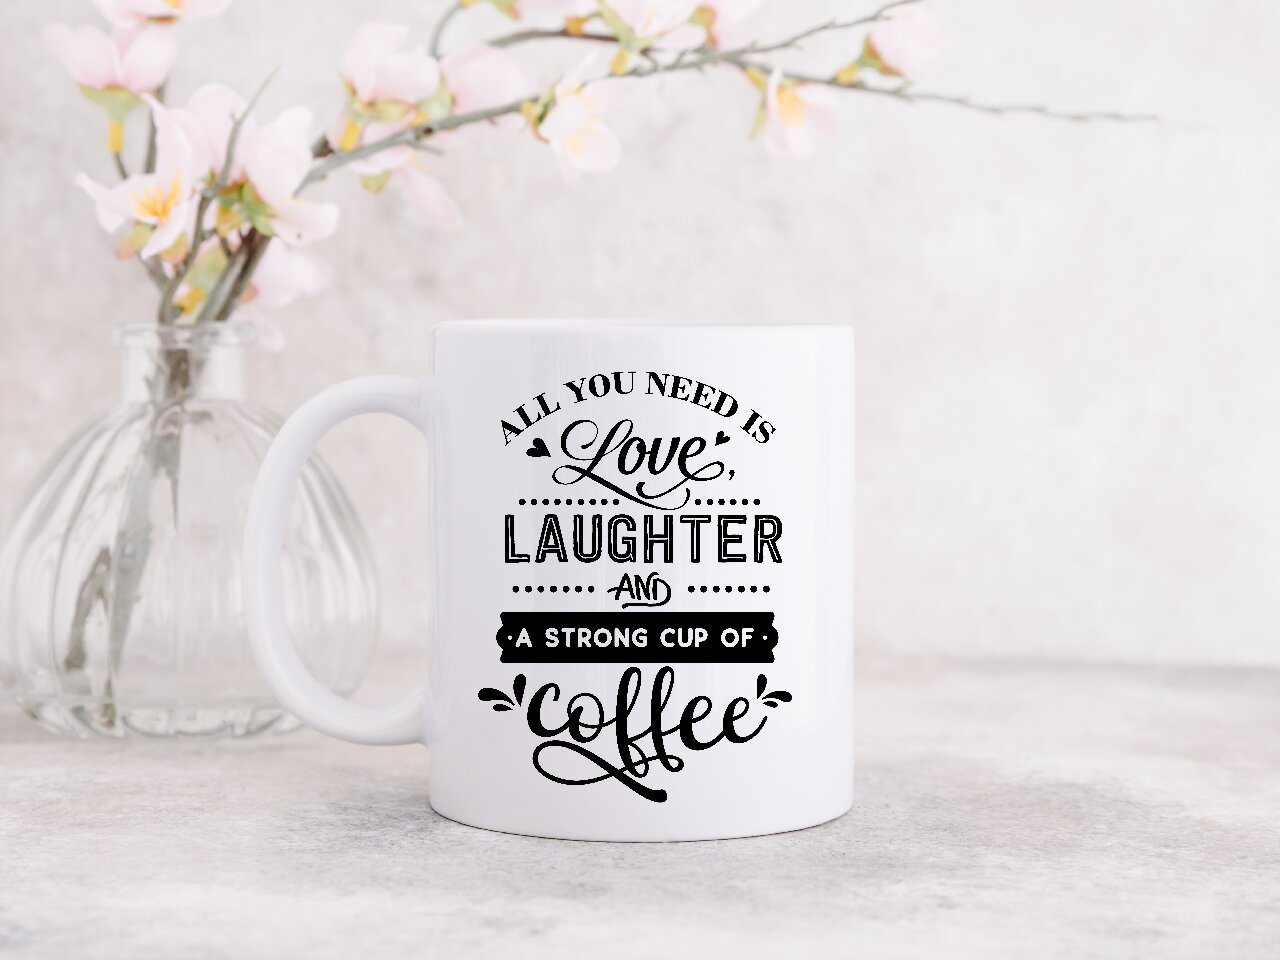 All you Need Is Love, Laughter And A Strong Cup Of Coffee - Coffee Mug